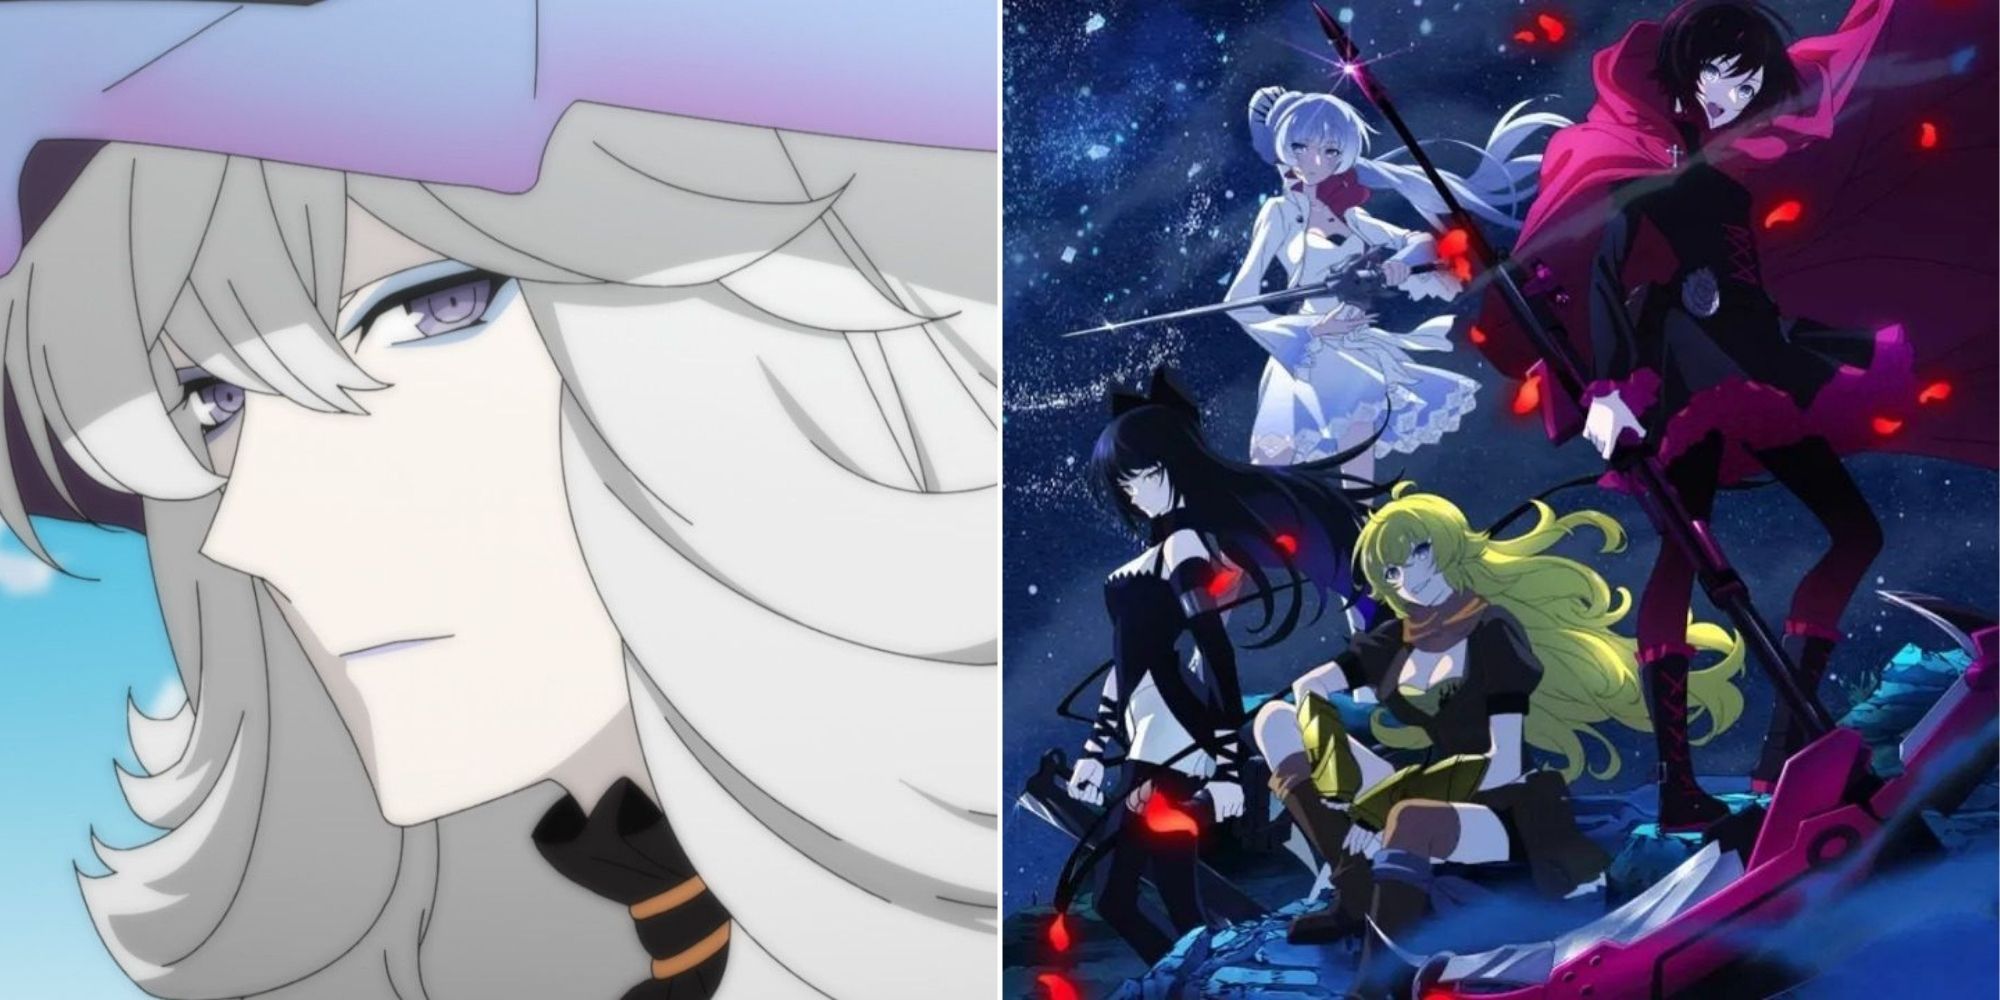 Collage image of Shion Zaiden from RWBY, and the 4 RWBY main characters posing on a snowy hillside